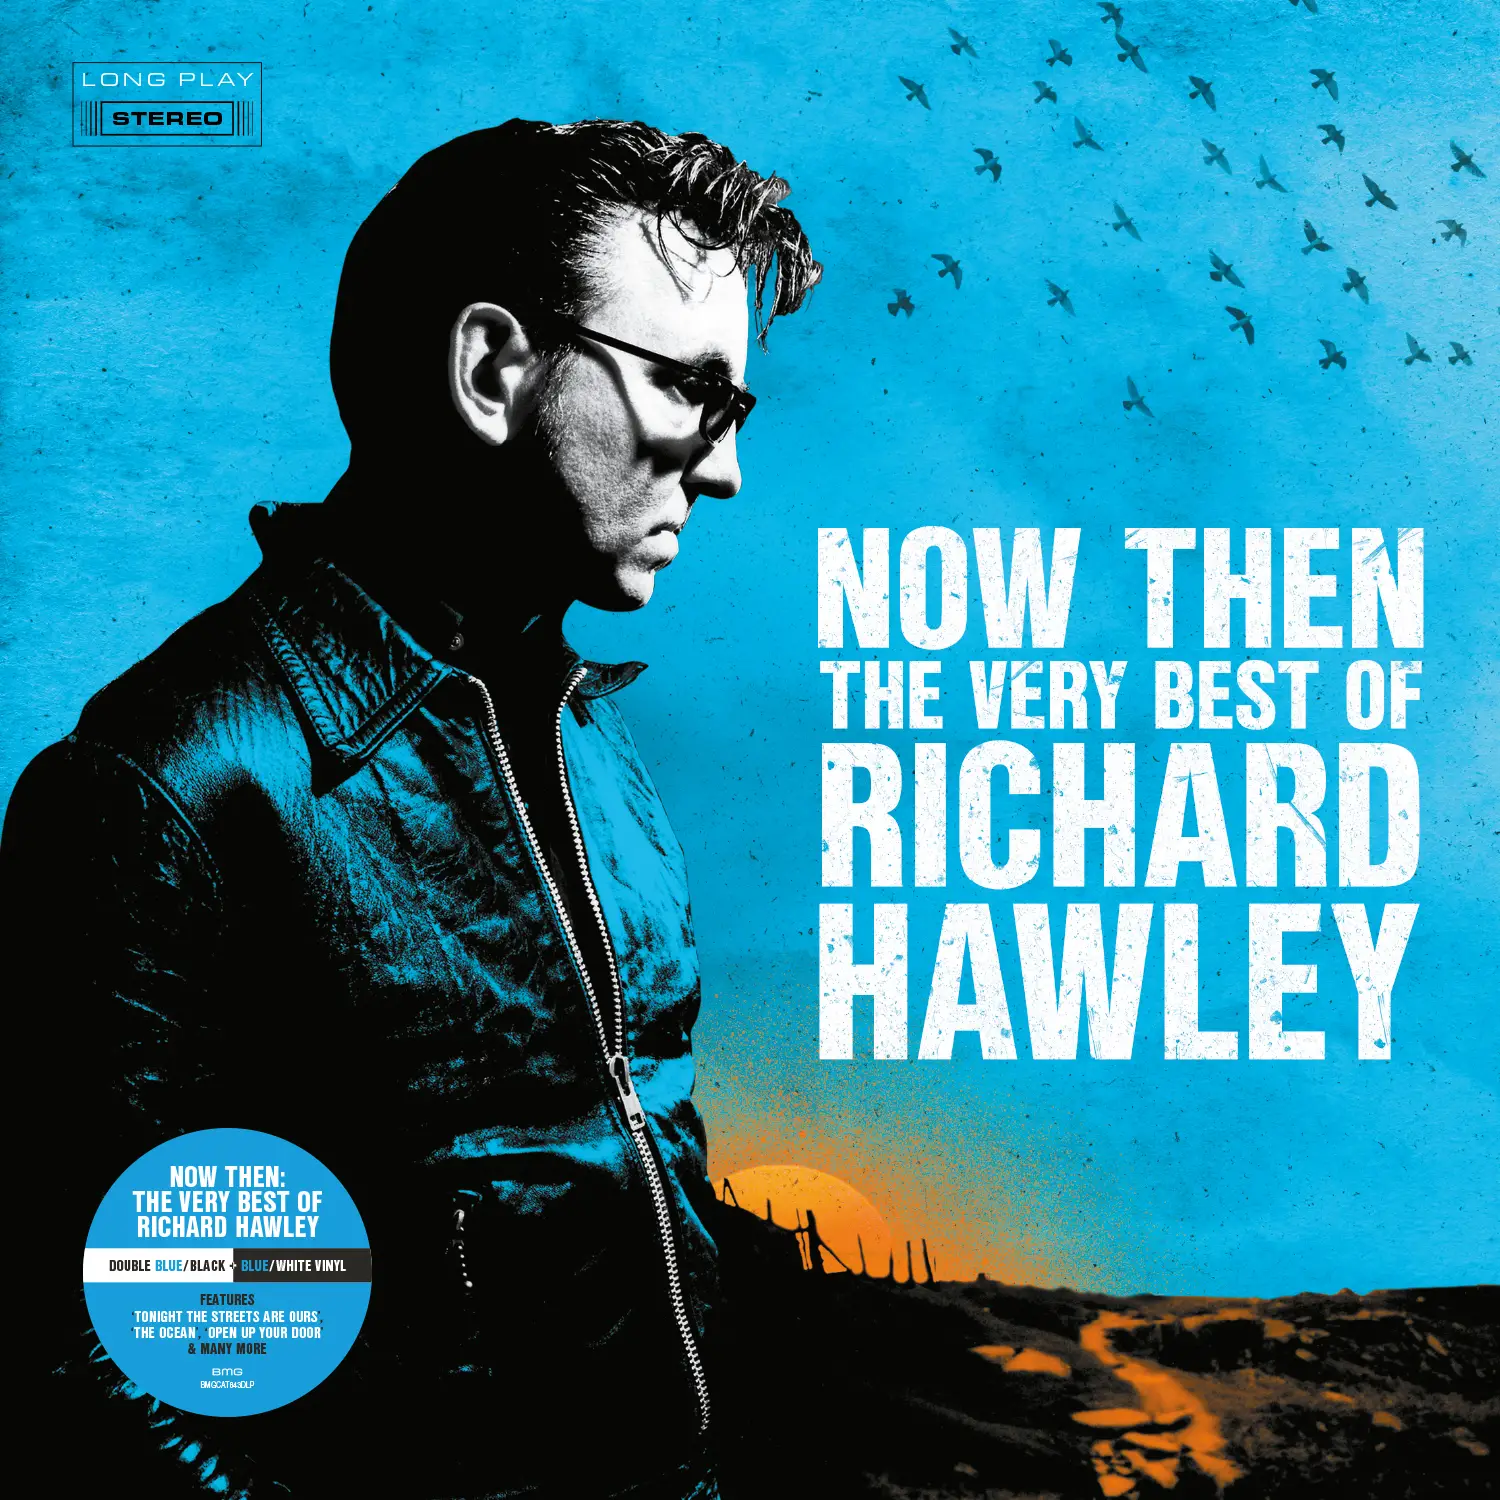 <strong>Richard Hawley - Now Then: The Very Best Of Richard Hawley</strong> (Vinyl LP - black)